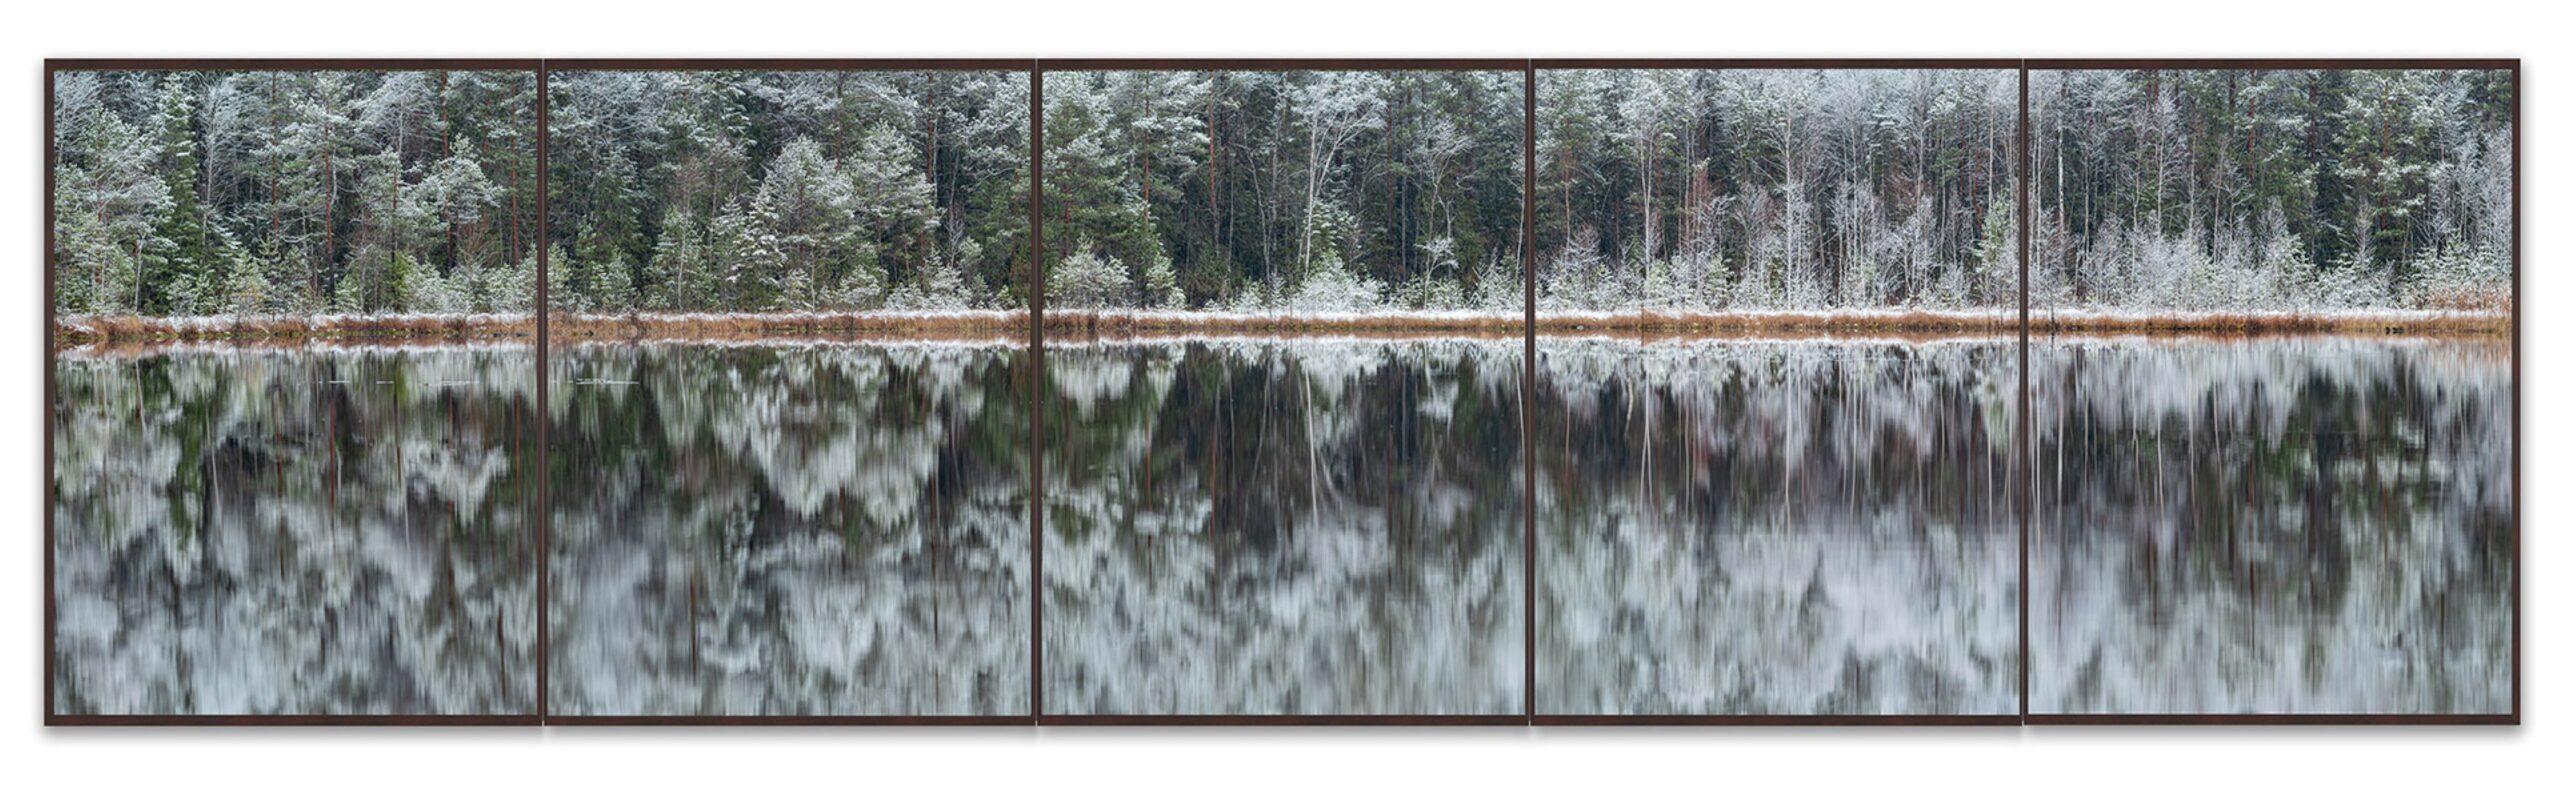 Deep Mirroring Forest 007 by Bernhard Lang - Landscape photography, trees, snowy For Sale 2